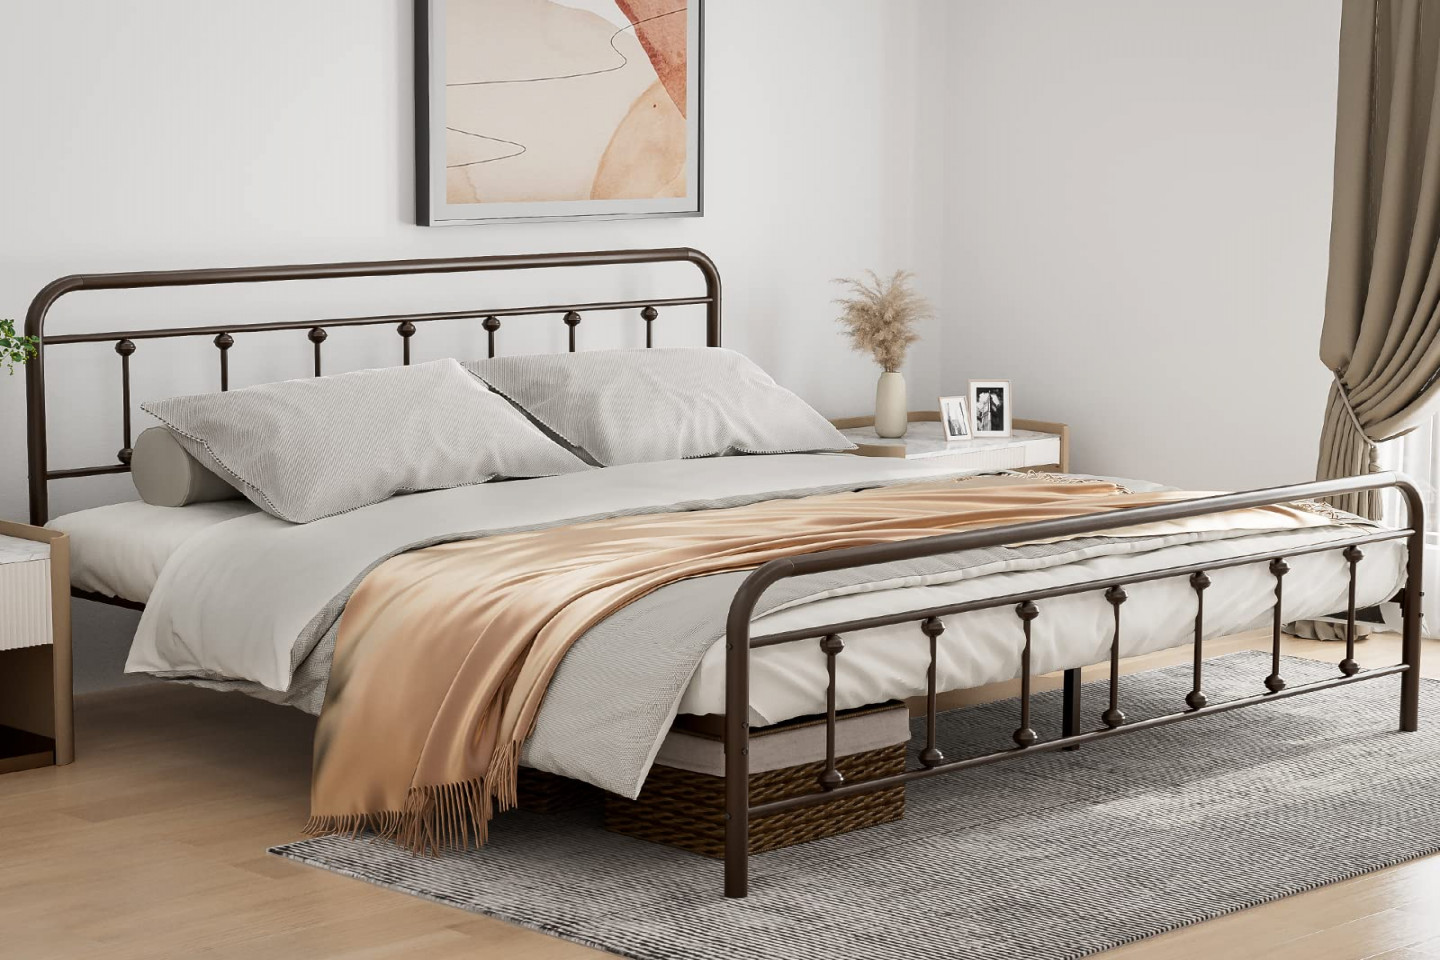 IKIFLY California King Size Metal Platform Bed Frame with Headboard &  Footboard, Strong Steel Slats, Mattress Foundation, Victorian Vintage  Style, No